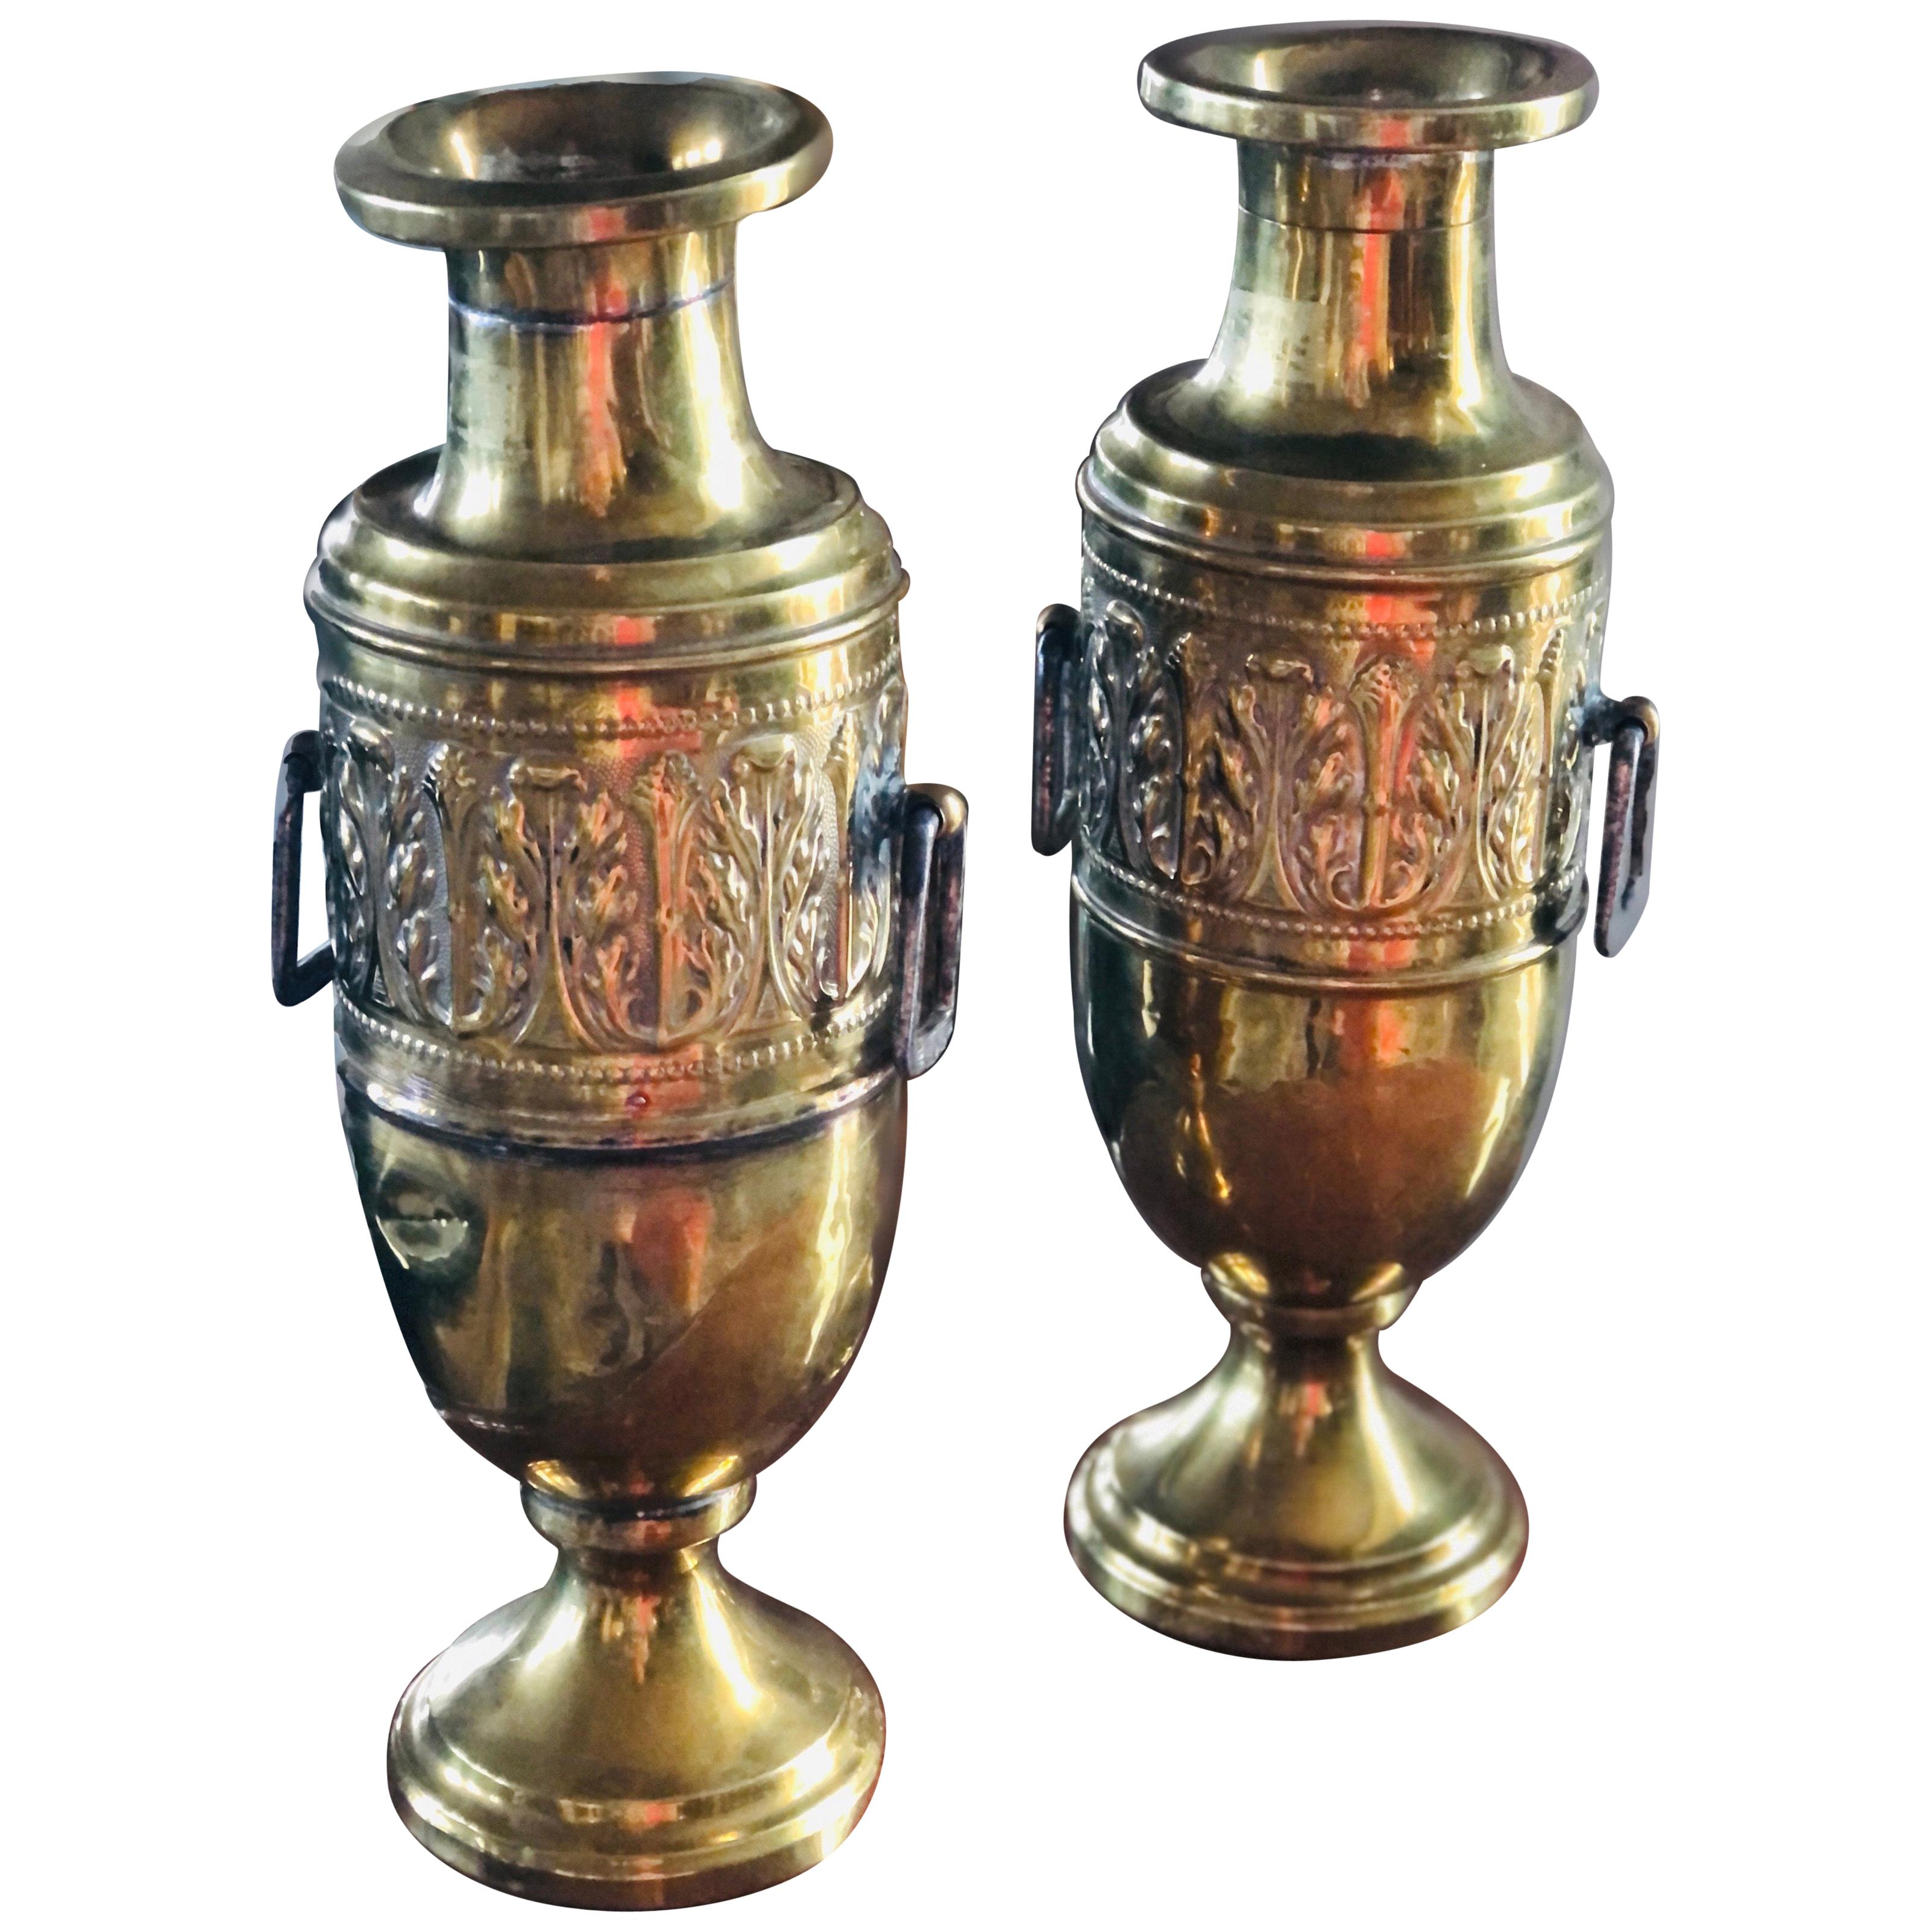 Pair of Two French Brass Urns or Vases with Floral Handmade Decoration For Sale